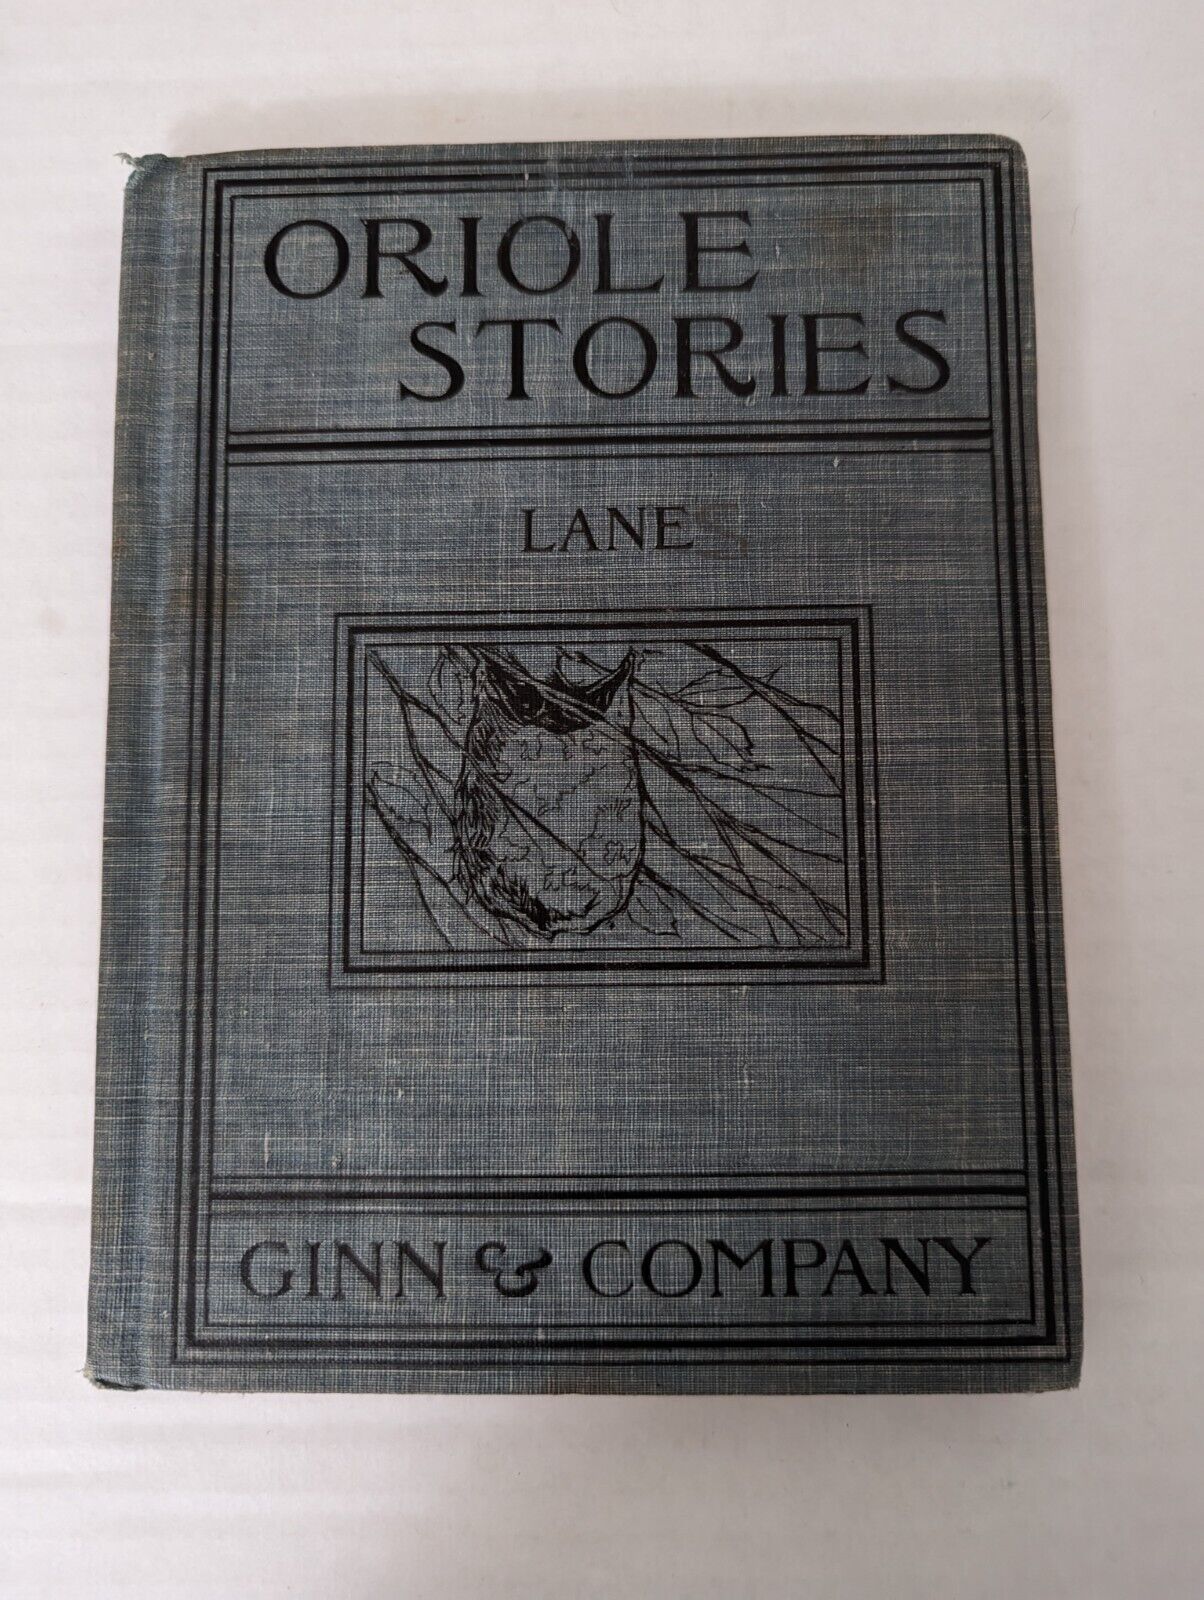 VERY SCARCE Oriole Stories for Beginners by Lane 1900 First Edition Hardcover